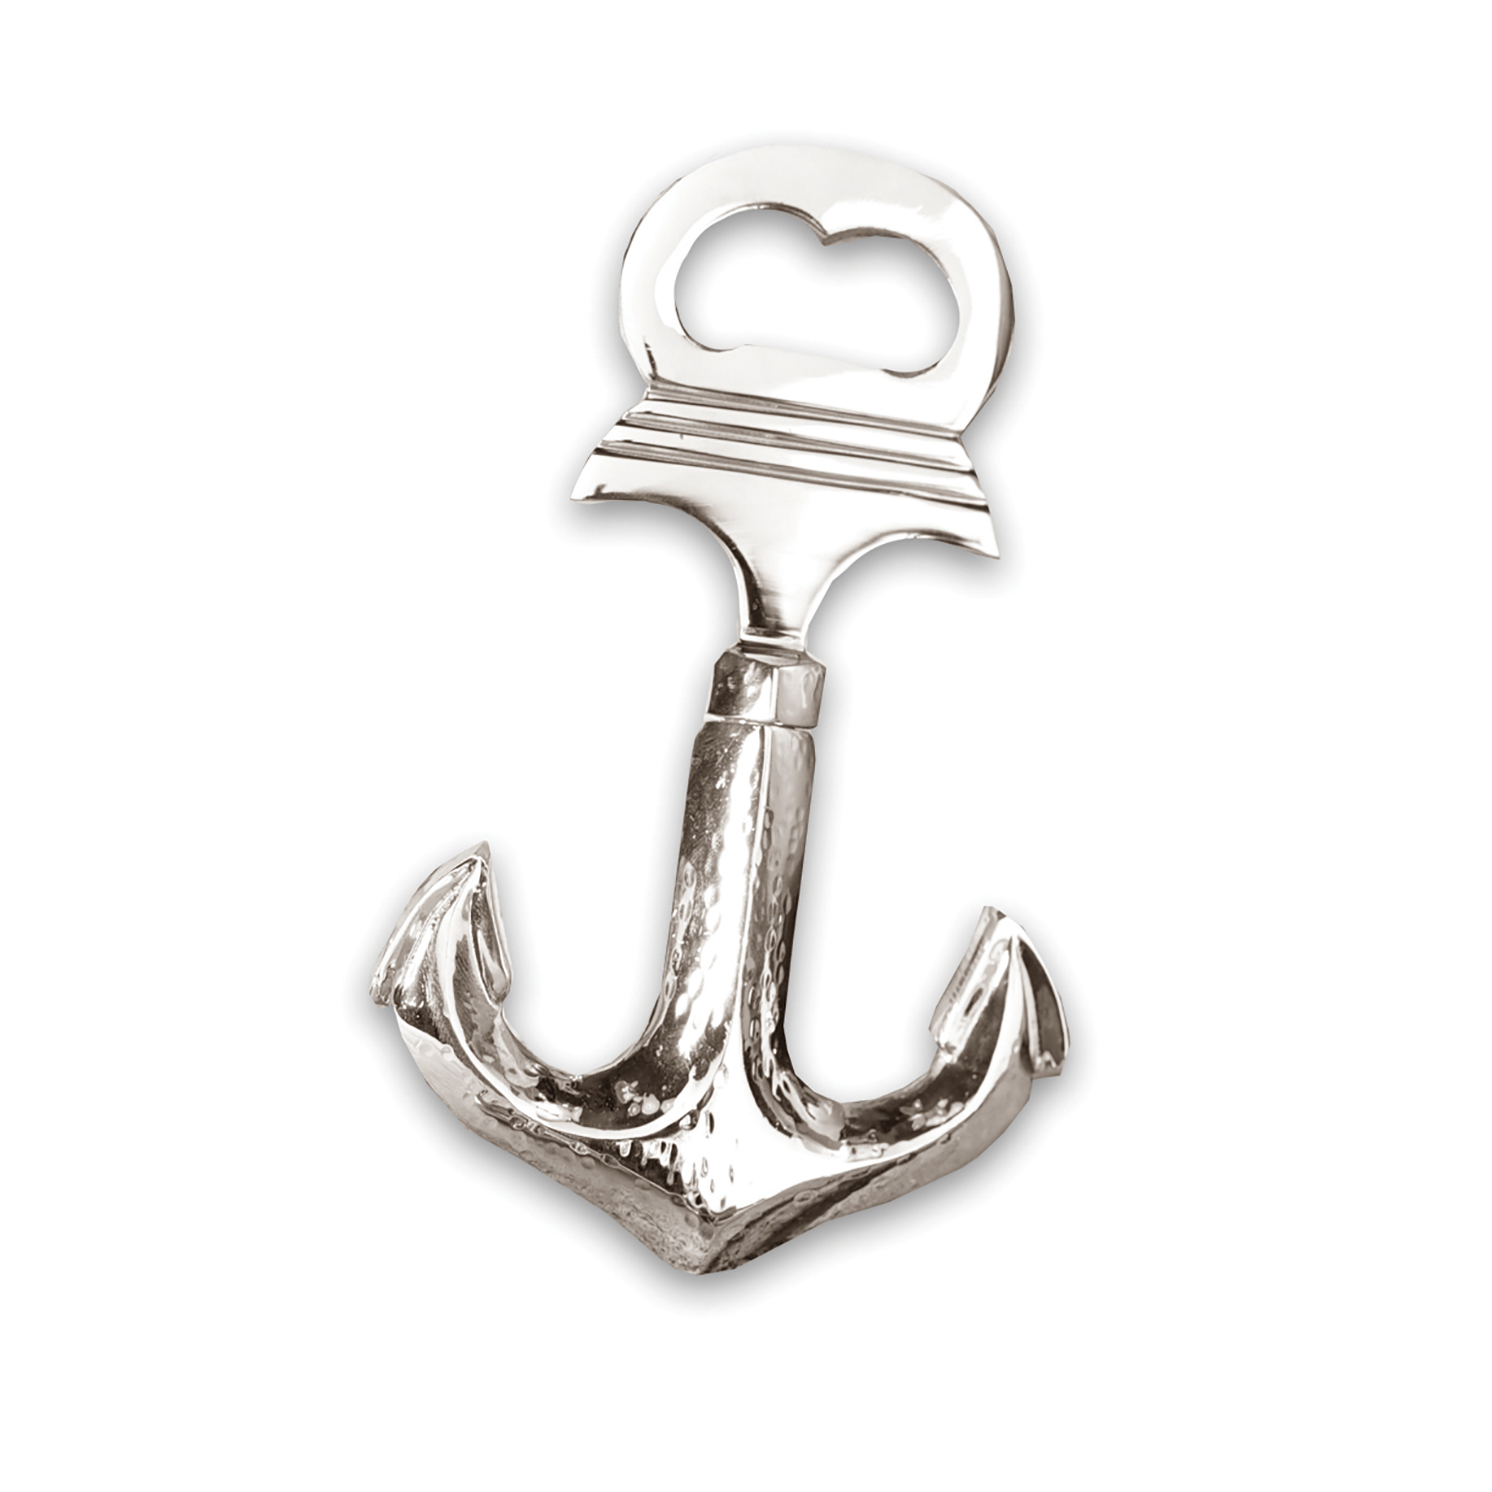 Anchor Bottle Opener With Integral Corkscrew Culinary Concepts 